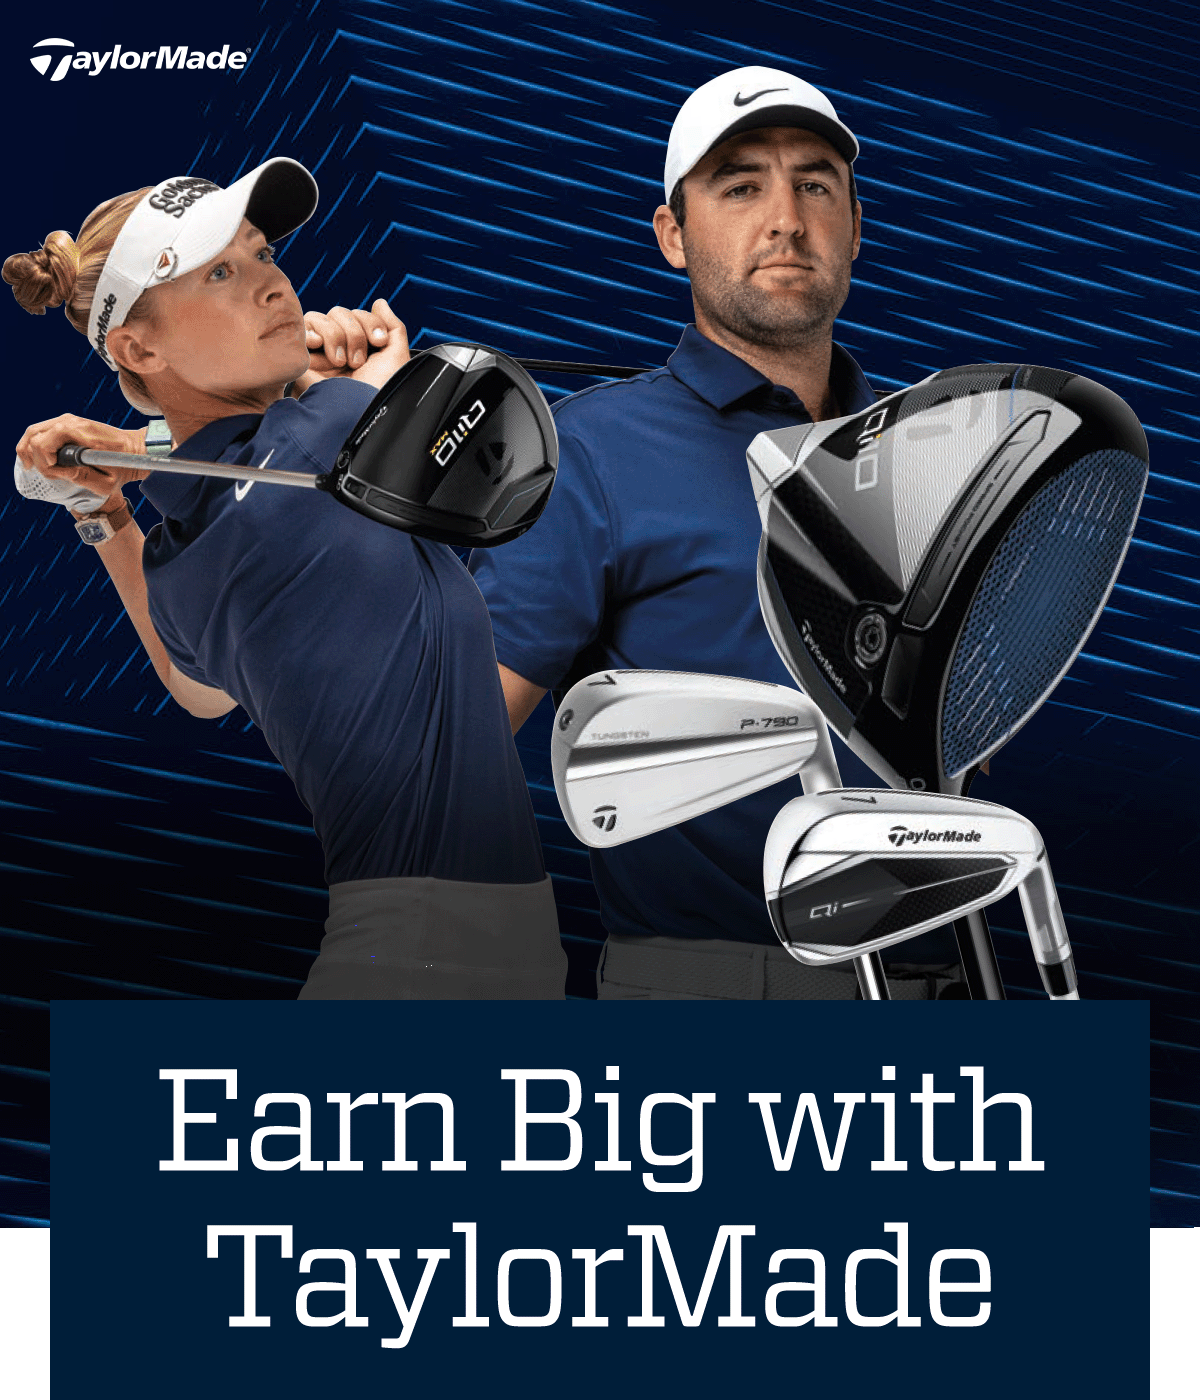 Earn big with TaylorMade.